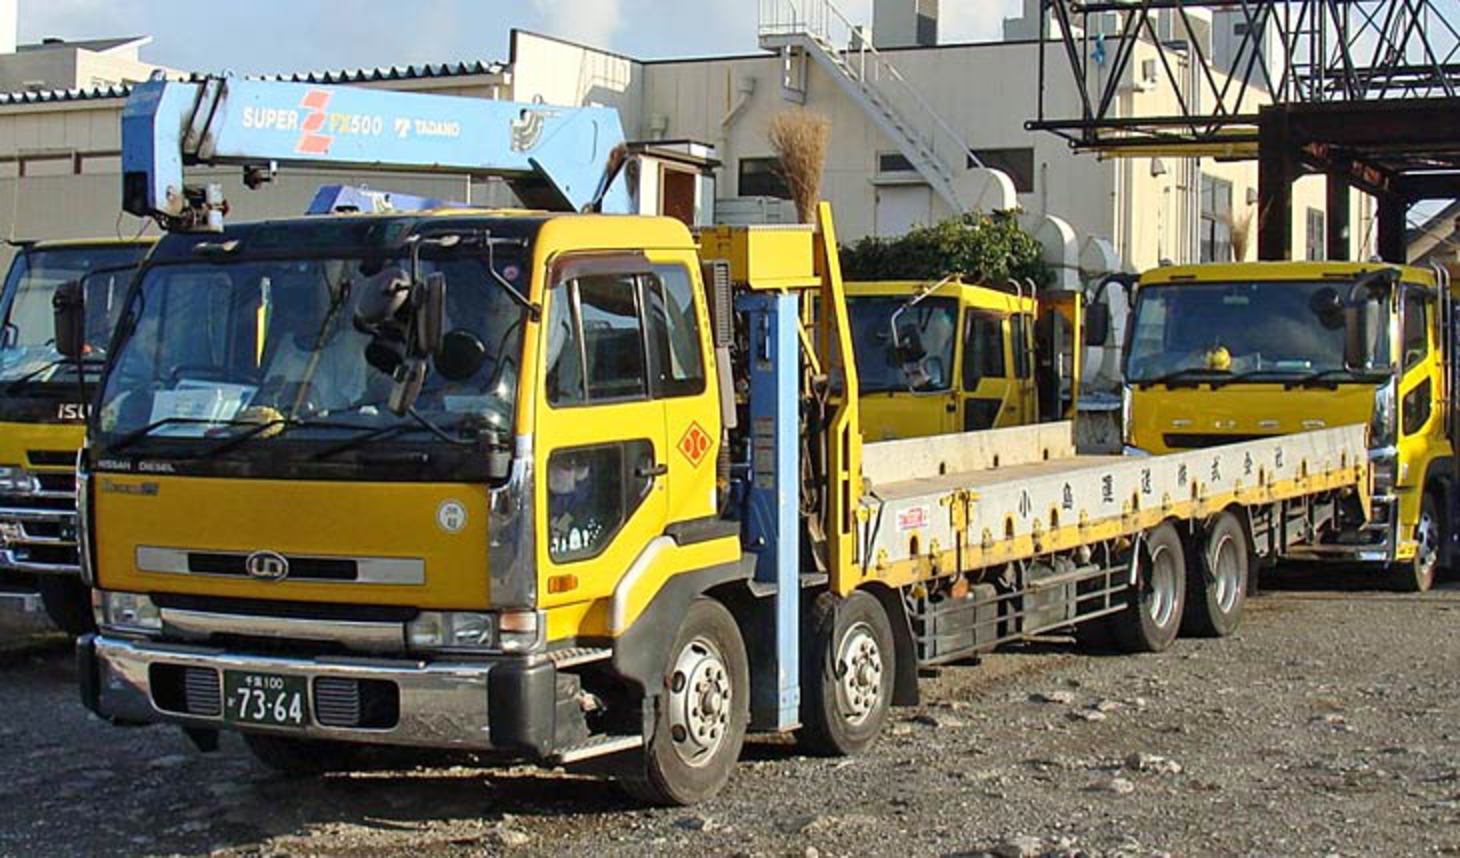 Nissan Diesel 3300 Photo Gallery: Photo #01 out of 7, Image Size ...